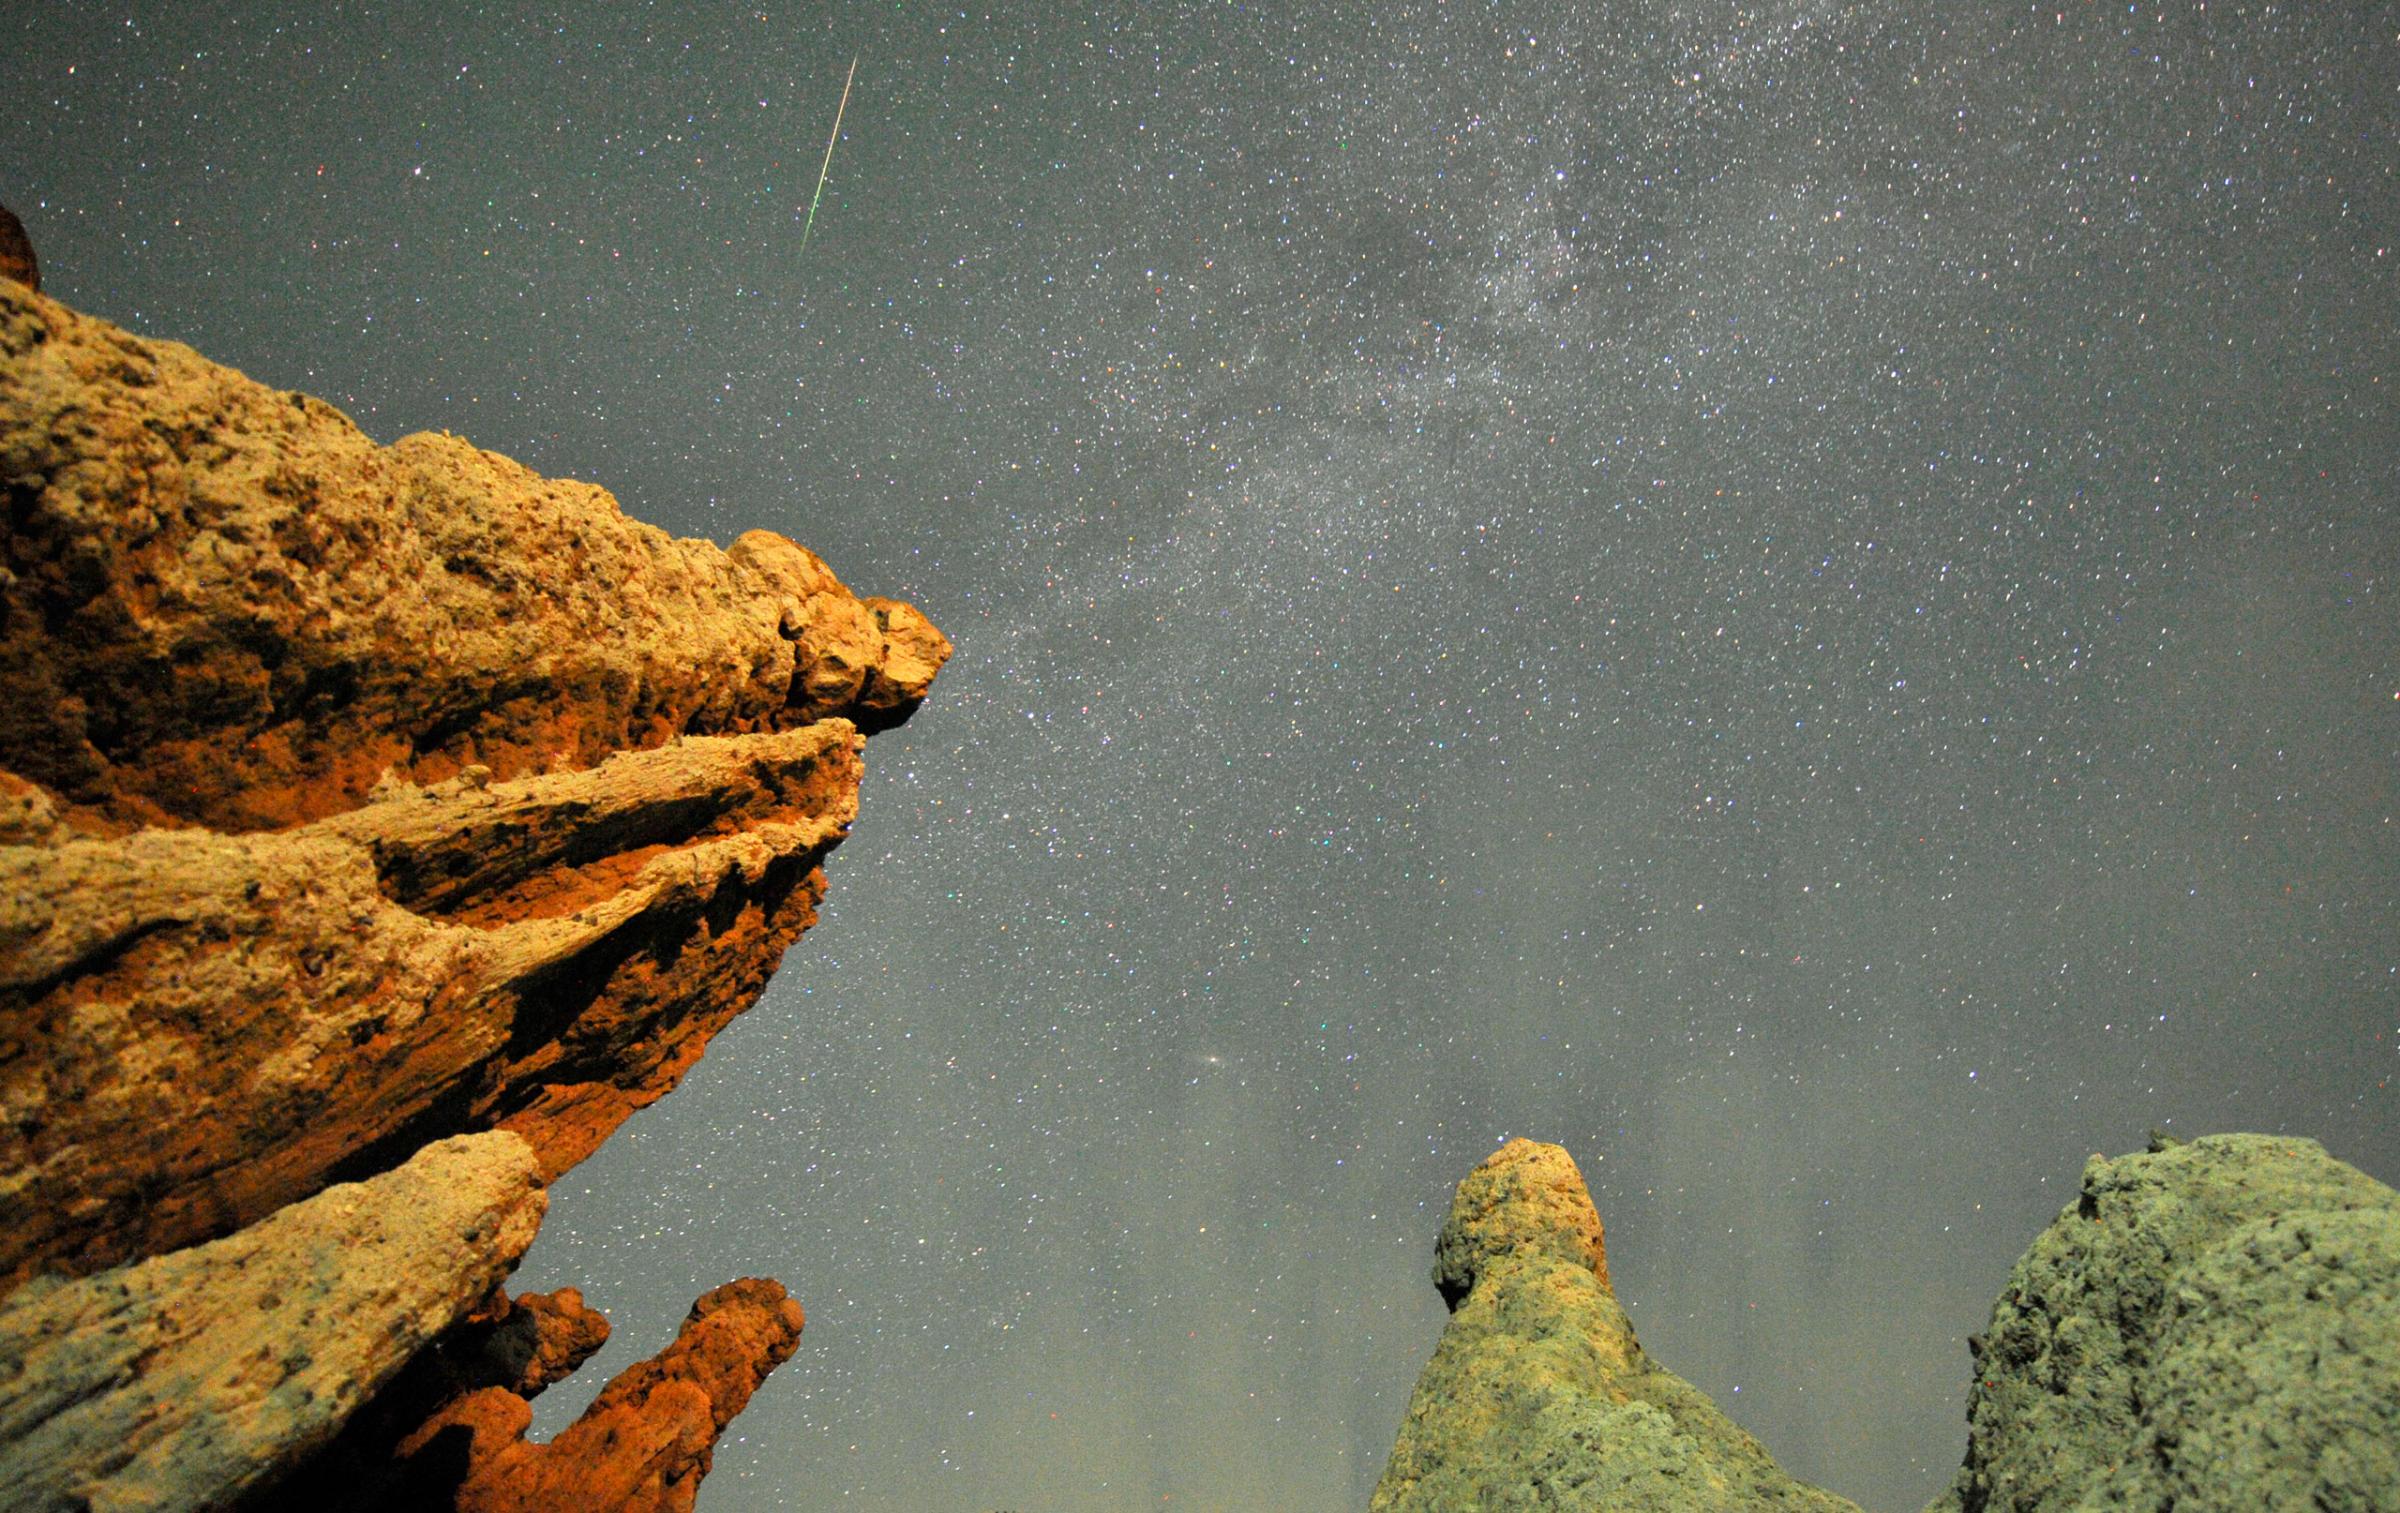 A Perseid meteor streaks past stars in the night sky over the village of Kuklici, known for its hundreds of naturally formed stones, near Kratovo, east of Skopje, on Aug. 13, 2012.